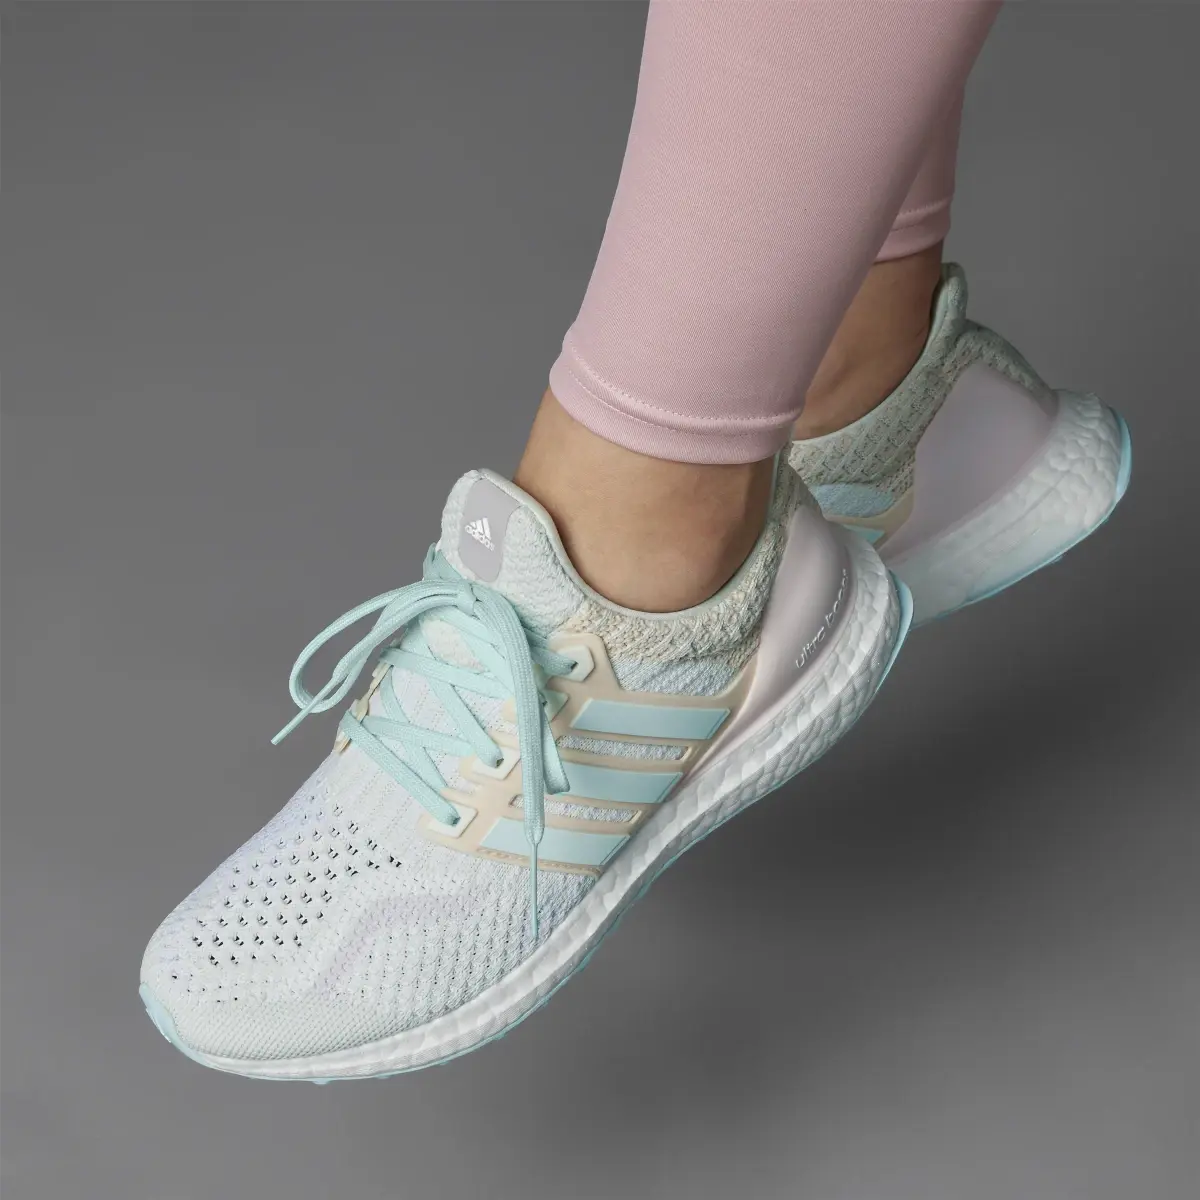 Adidas Ultraboost 5.0 DNA Shoes. 2